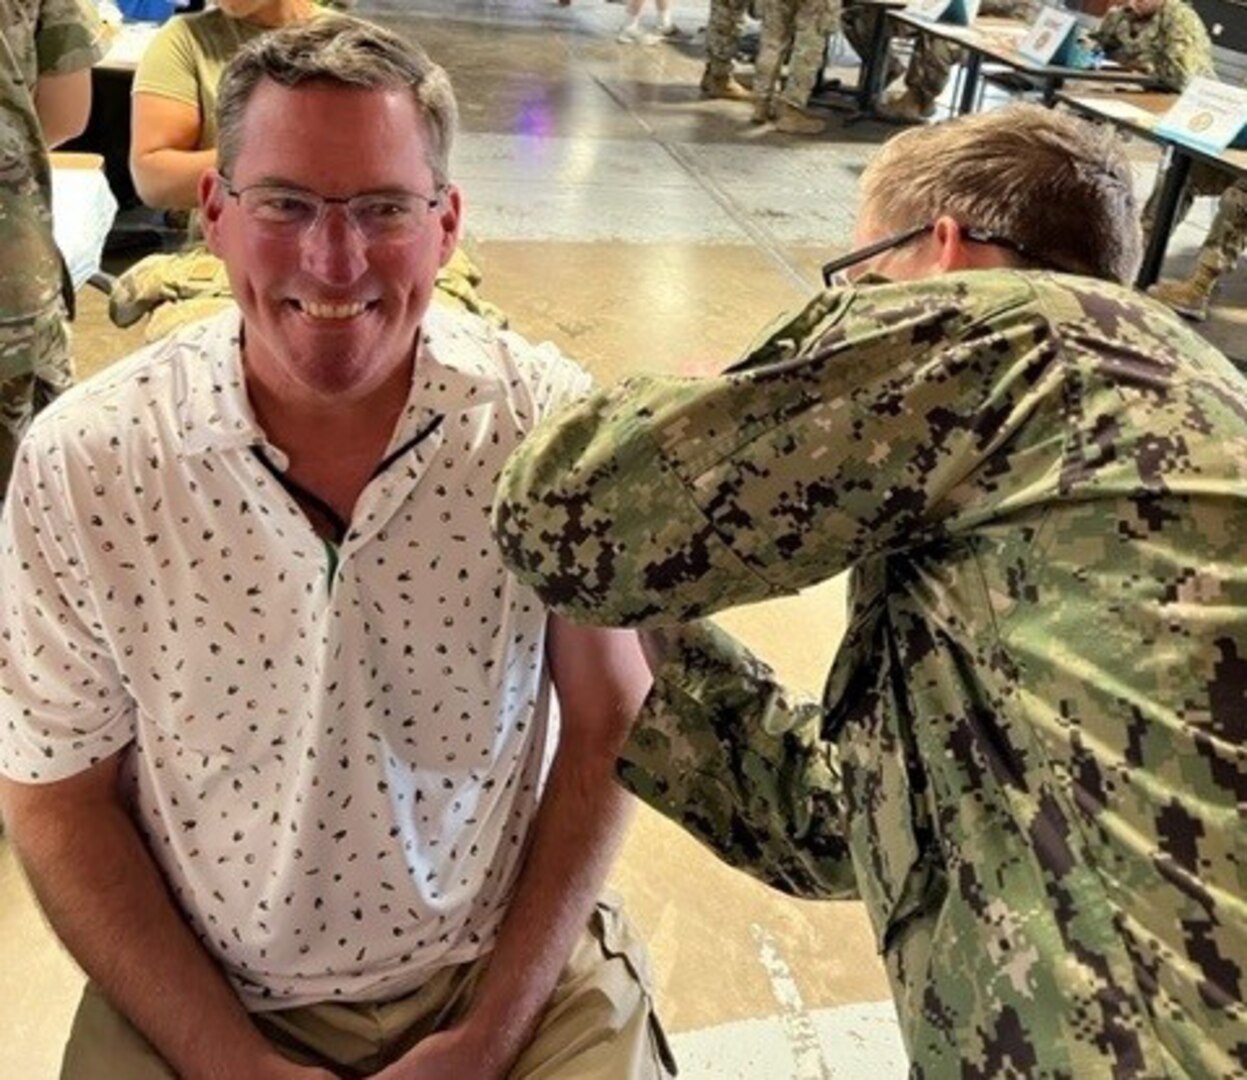 Man in white shirt sits as man on right in uniform administers flu shot.